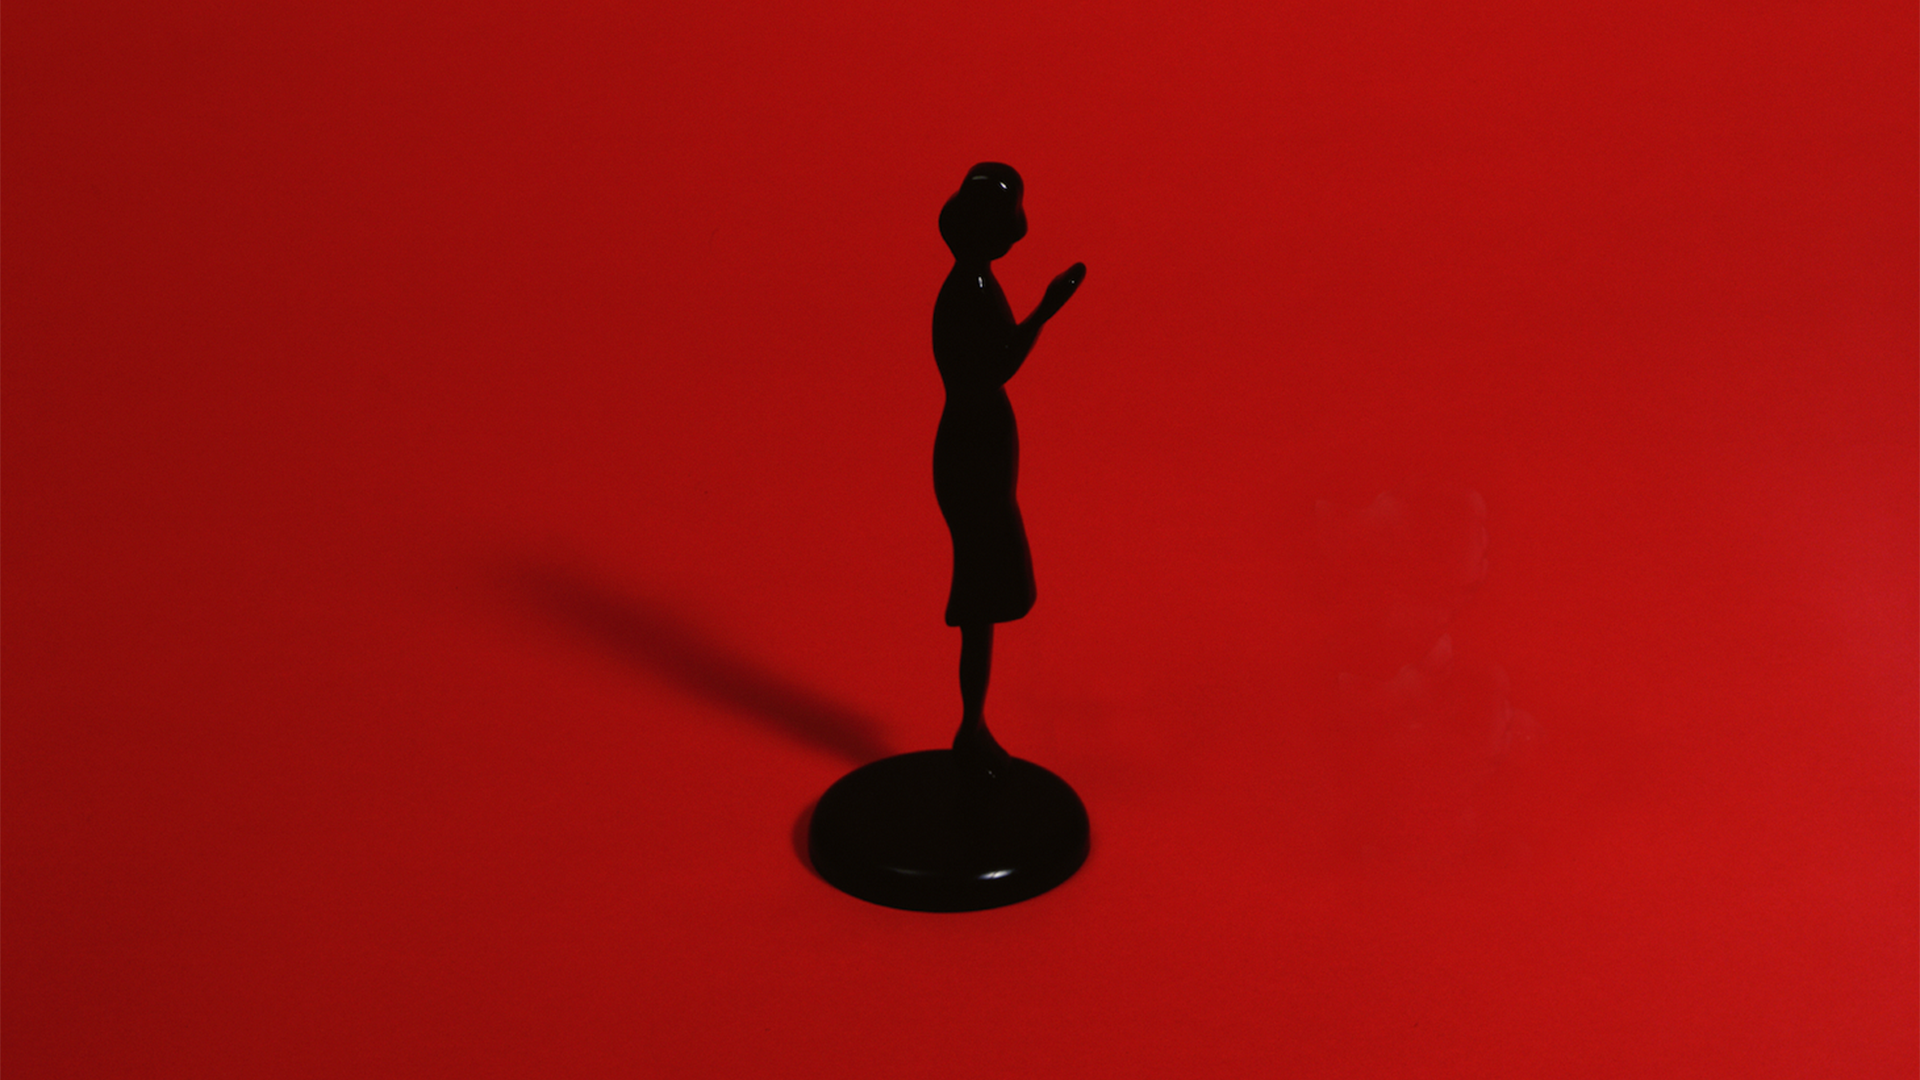  A silhouette figurine in a dress is set on a red background. It casts a shadow, and its arms are bent upward at the elbow.